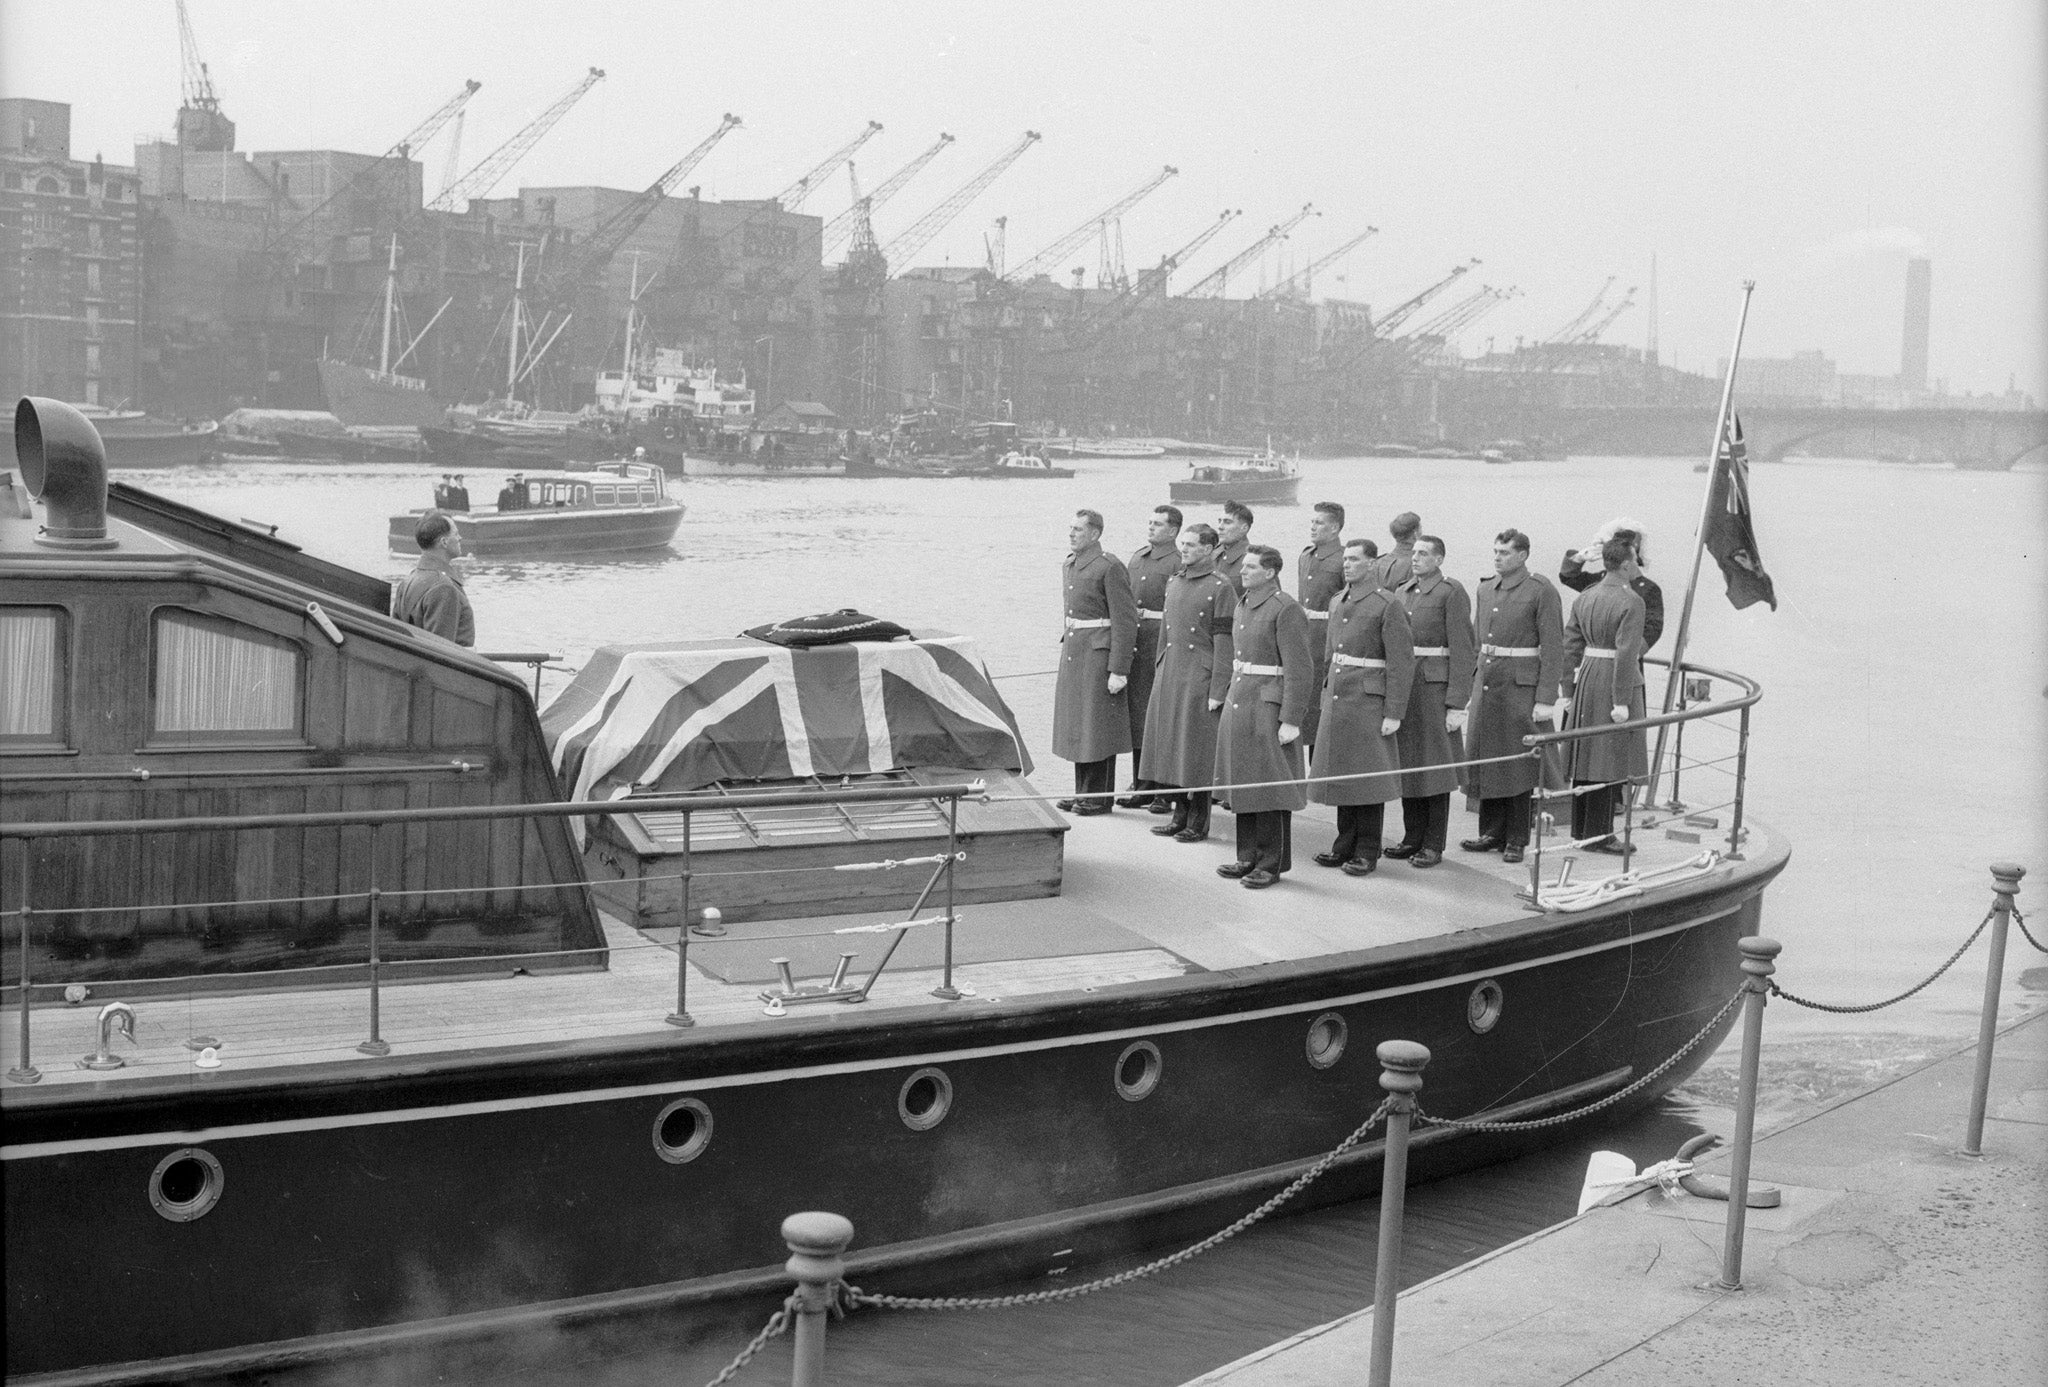 The cranes are lowered by dock workers after Winston Churchill's funeral, 30 January 1965